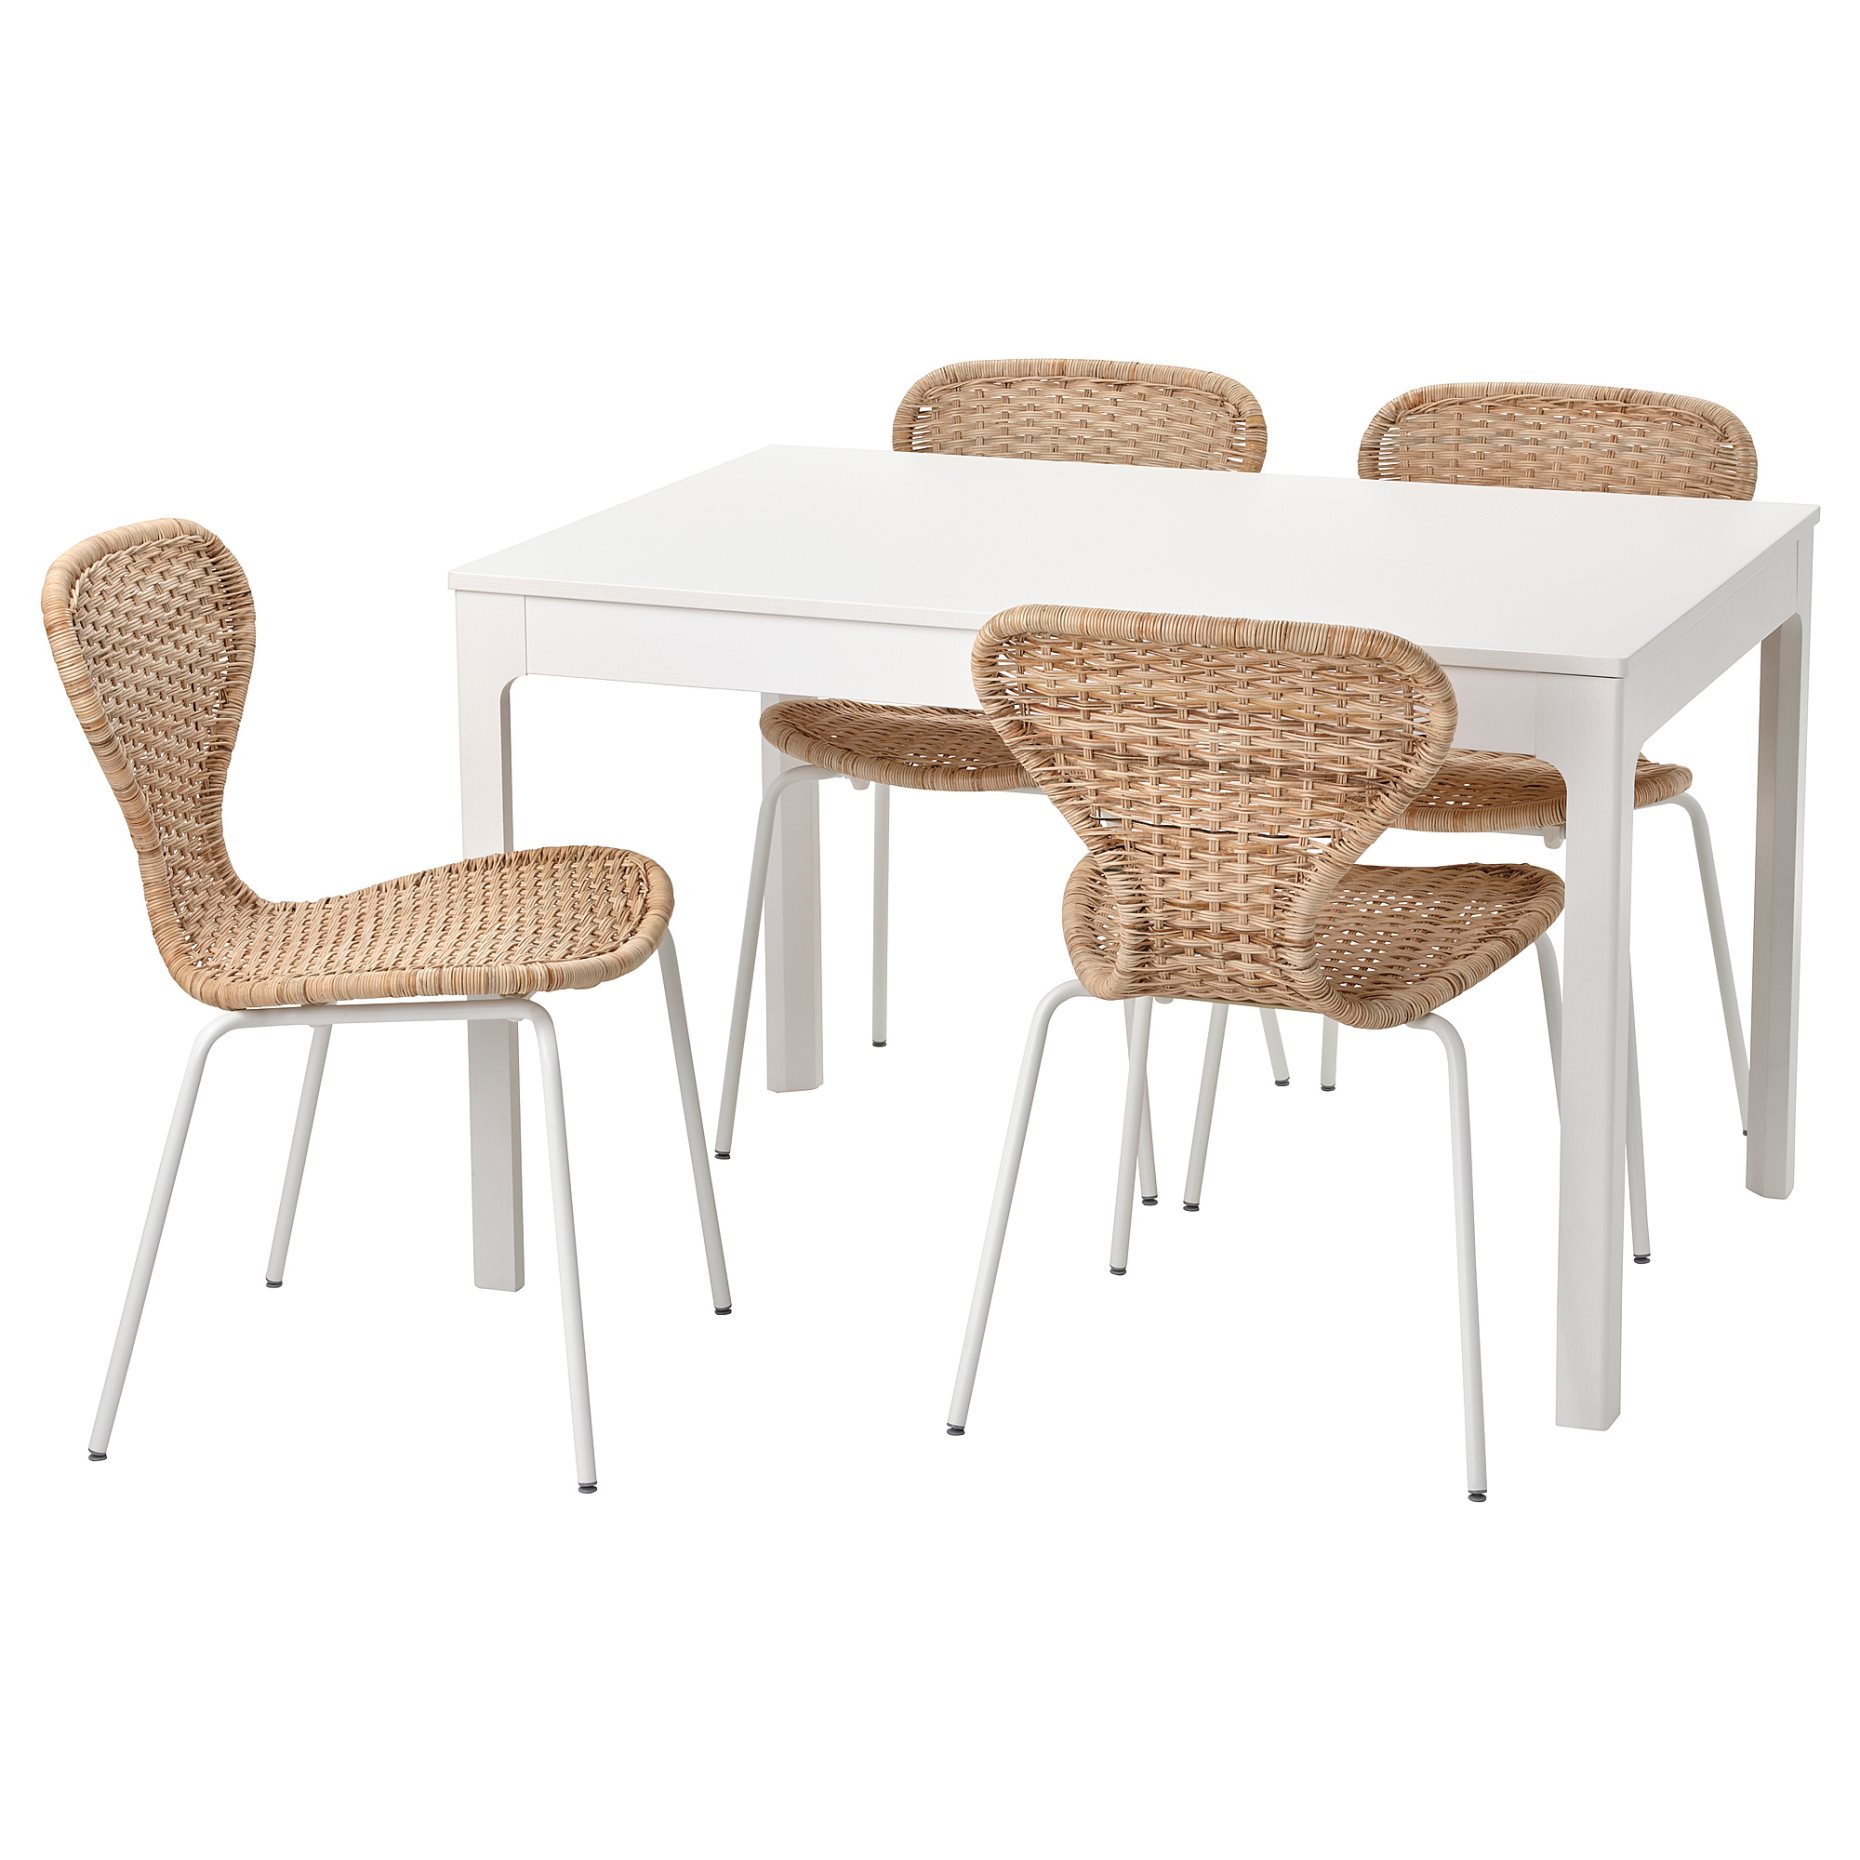 EKEDALEN/ALVSTA, table and 4 chairs, 120/180x80 cm, 094.815.80